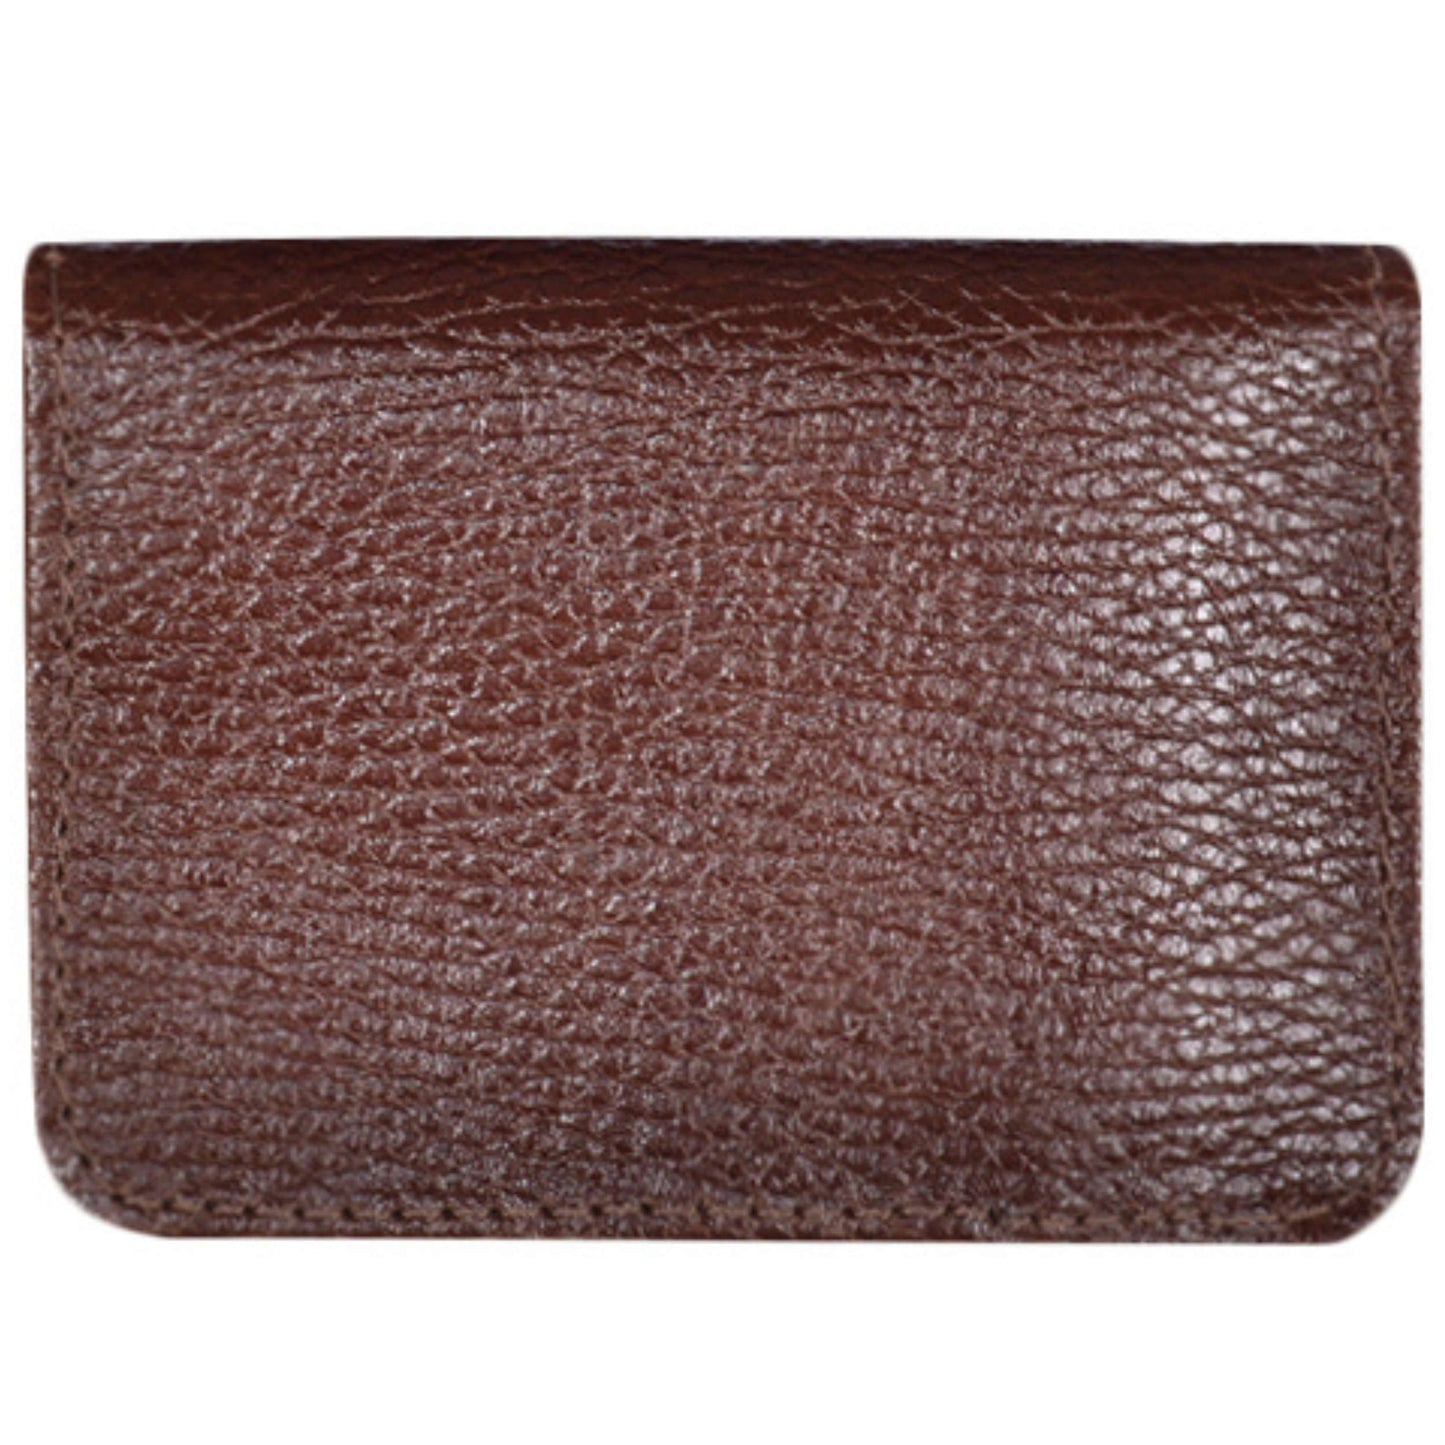 Chocolate Brown Leather wallet with id holder and coin pocket